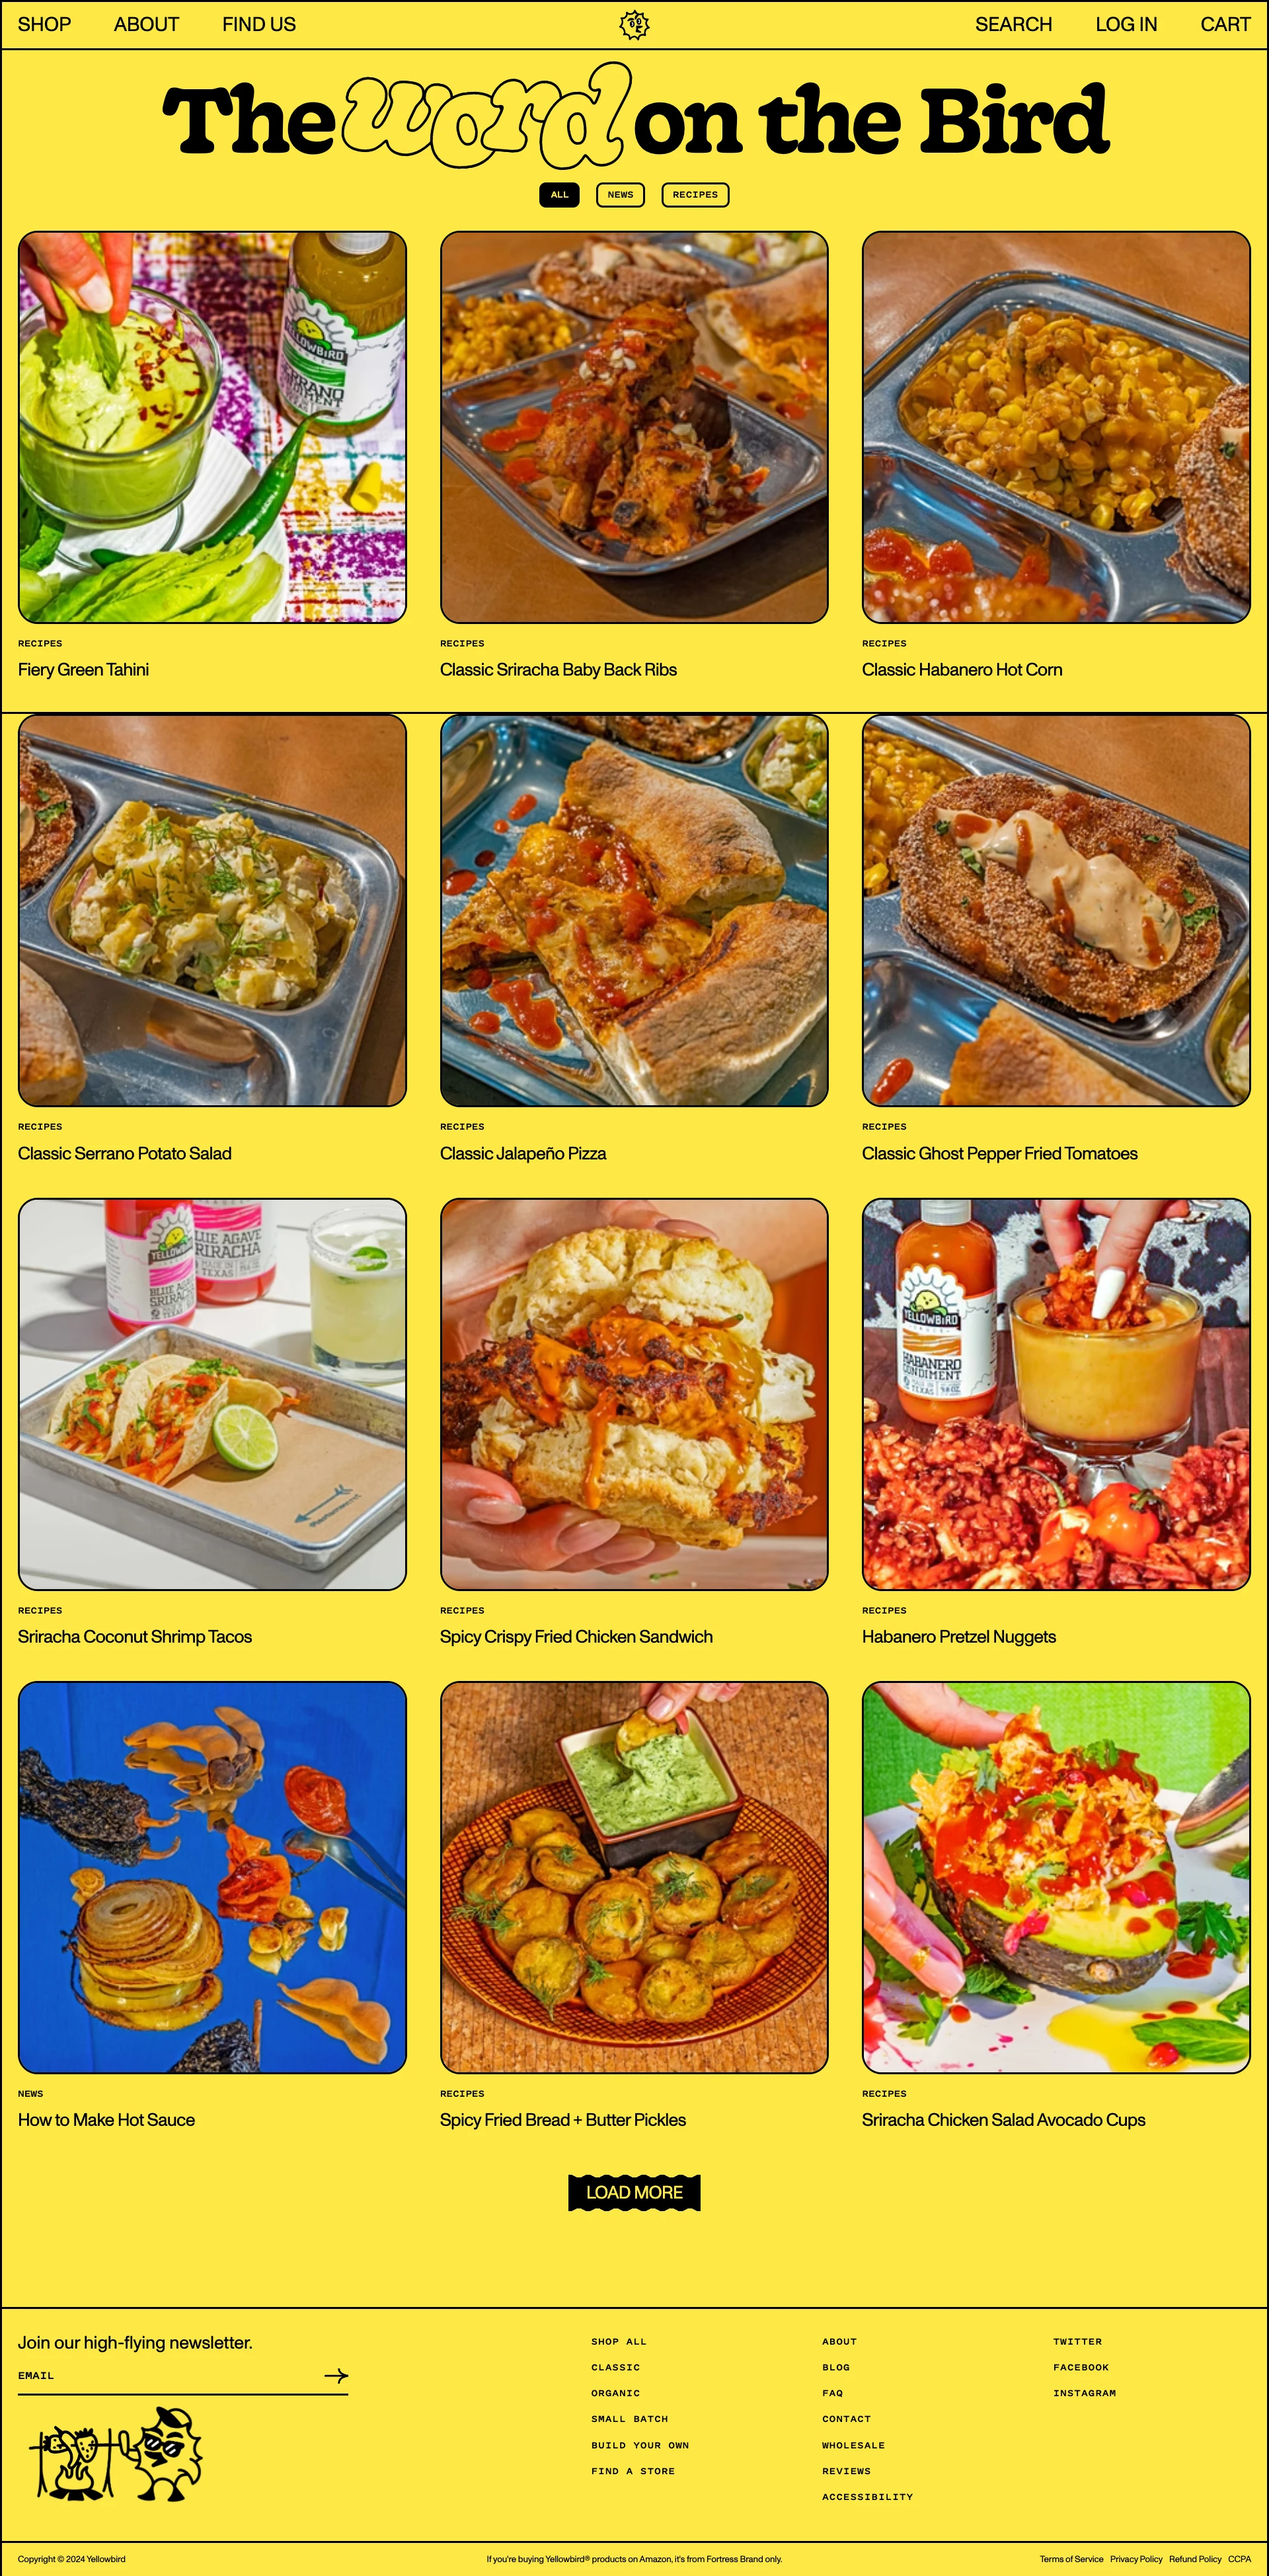 Yellowbird Landing Page Example: The world's best-tasting hot sauce. Made with farm-fresh, no bullish!t ingredients, so you can drizzle as often and adventurously as you like 🔥.